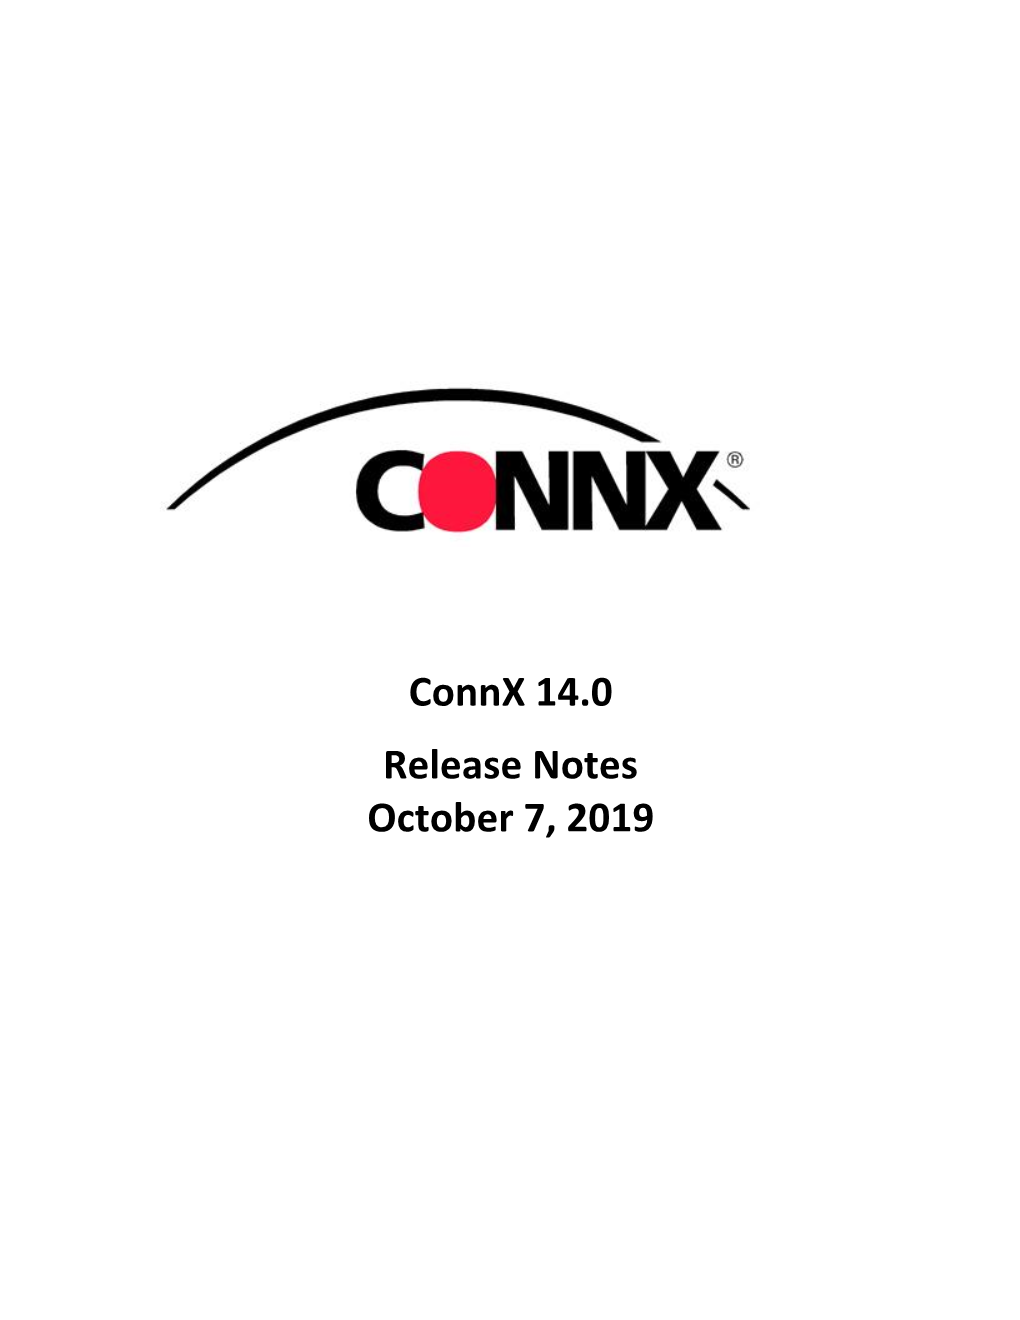 Connx 14.0 Release Notes October 7, 2019